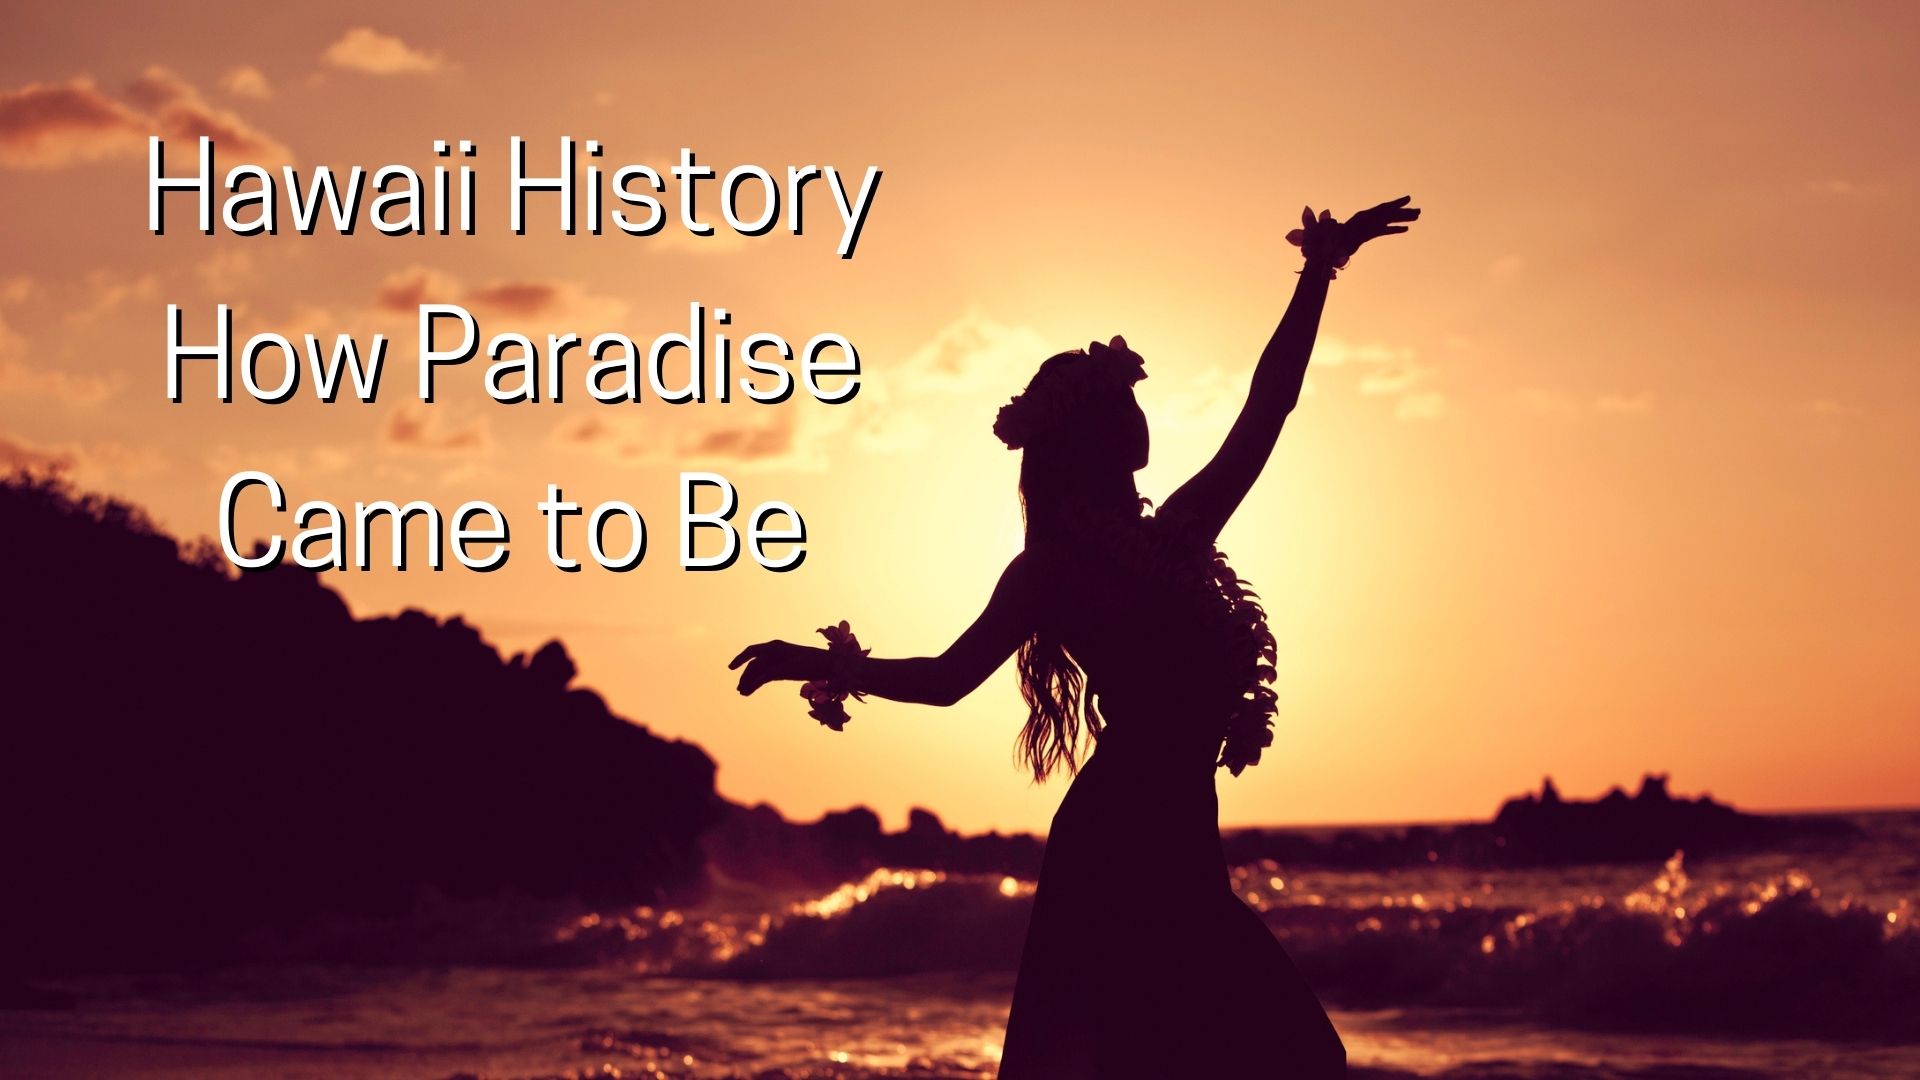 Hawaii History - How Paradise Came to Be